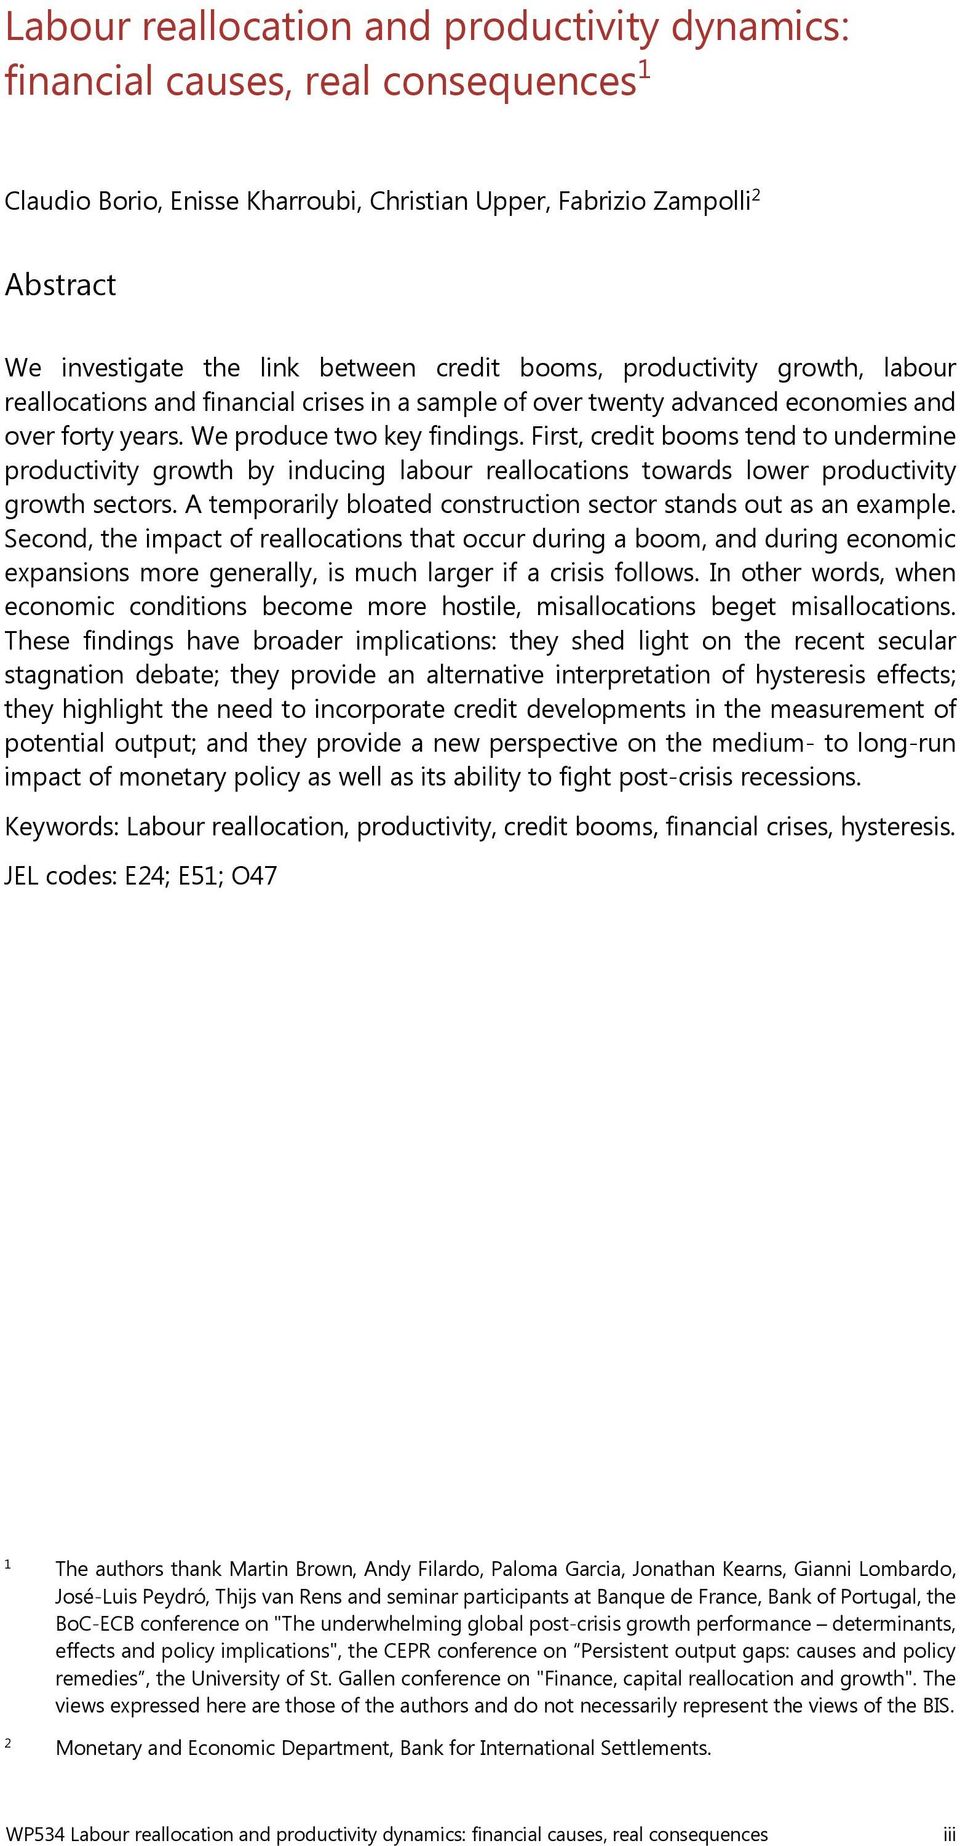 Firt, credit boom tend to undermine productivity growth by inducing labour reallocation toward lower productivity growth ector. A temporarily bloated contruction ector tand out a an example.